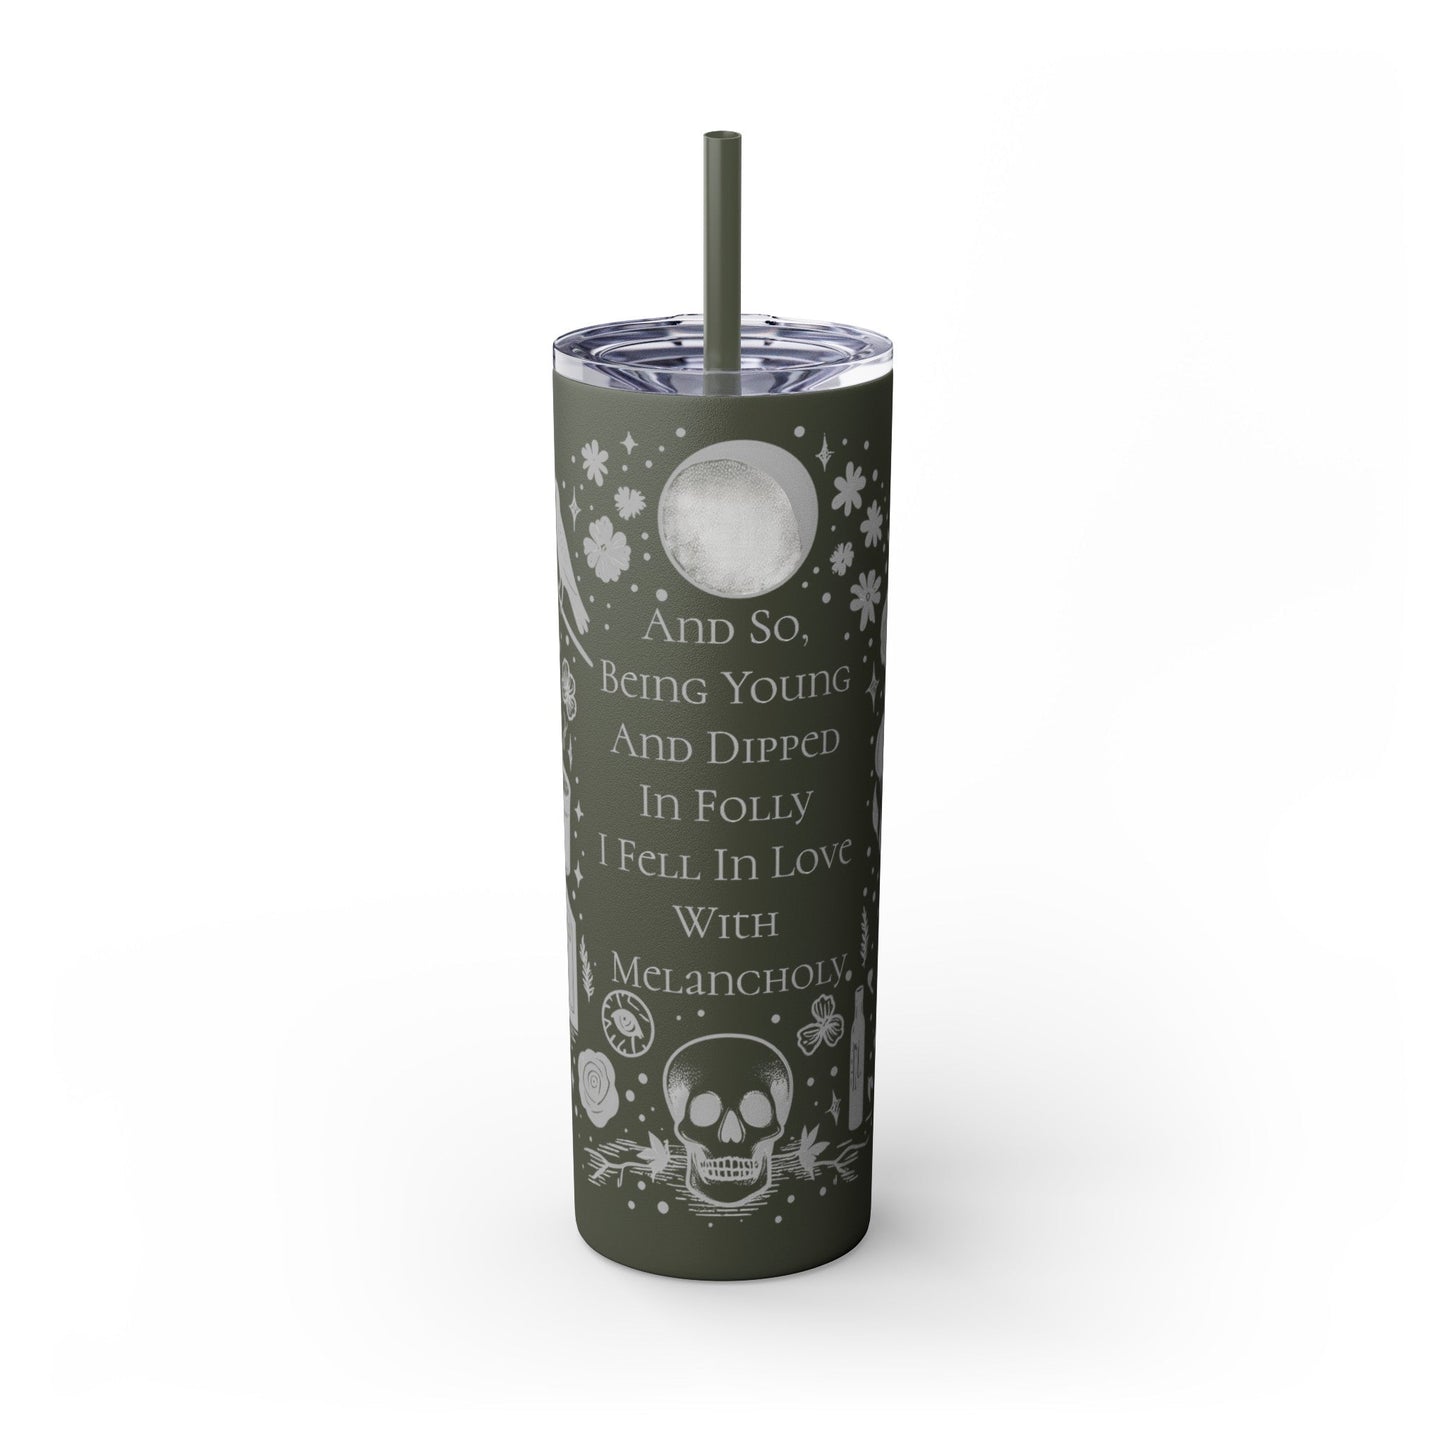 And So Being Young And Dipped In Folly I Fell In Love With Melancholy Skinny Tumbler with StrawMugVTZdesignsMattePine Needle20oz20 ozBottles & Tumblerscup